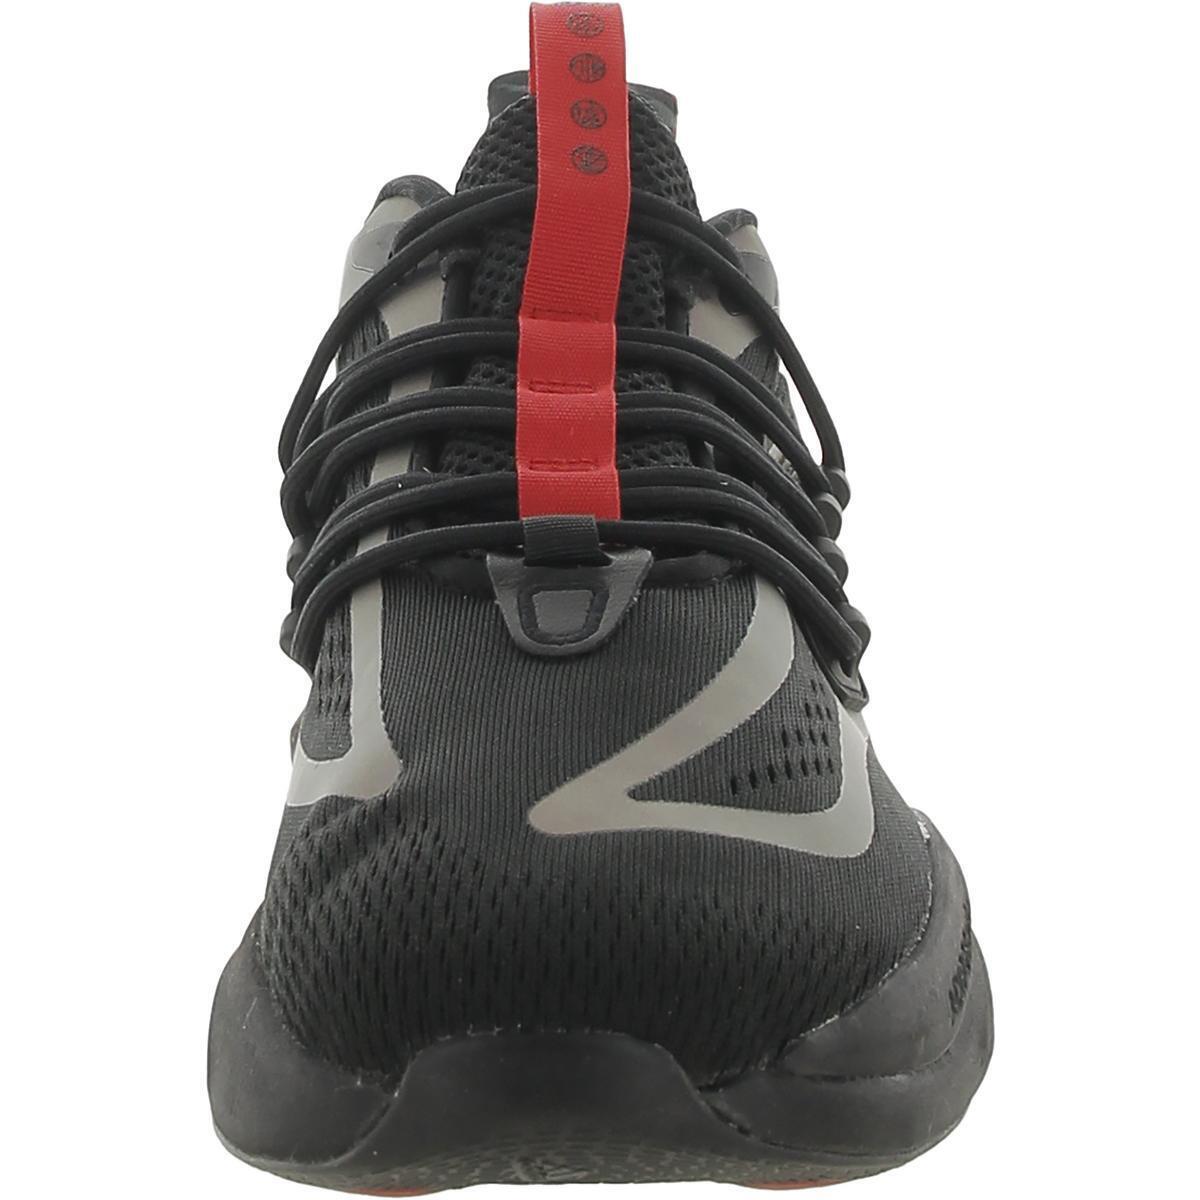 Adidas Mens Alphaboost V1 Fitness Running Training Shoes Sneakers Bhfo 4366 - Core Black/Solar Red